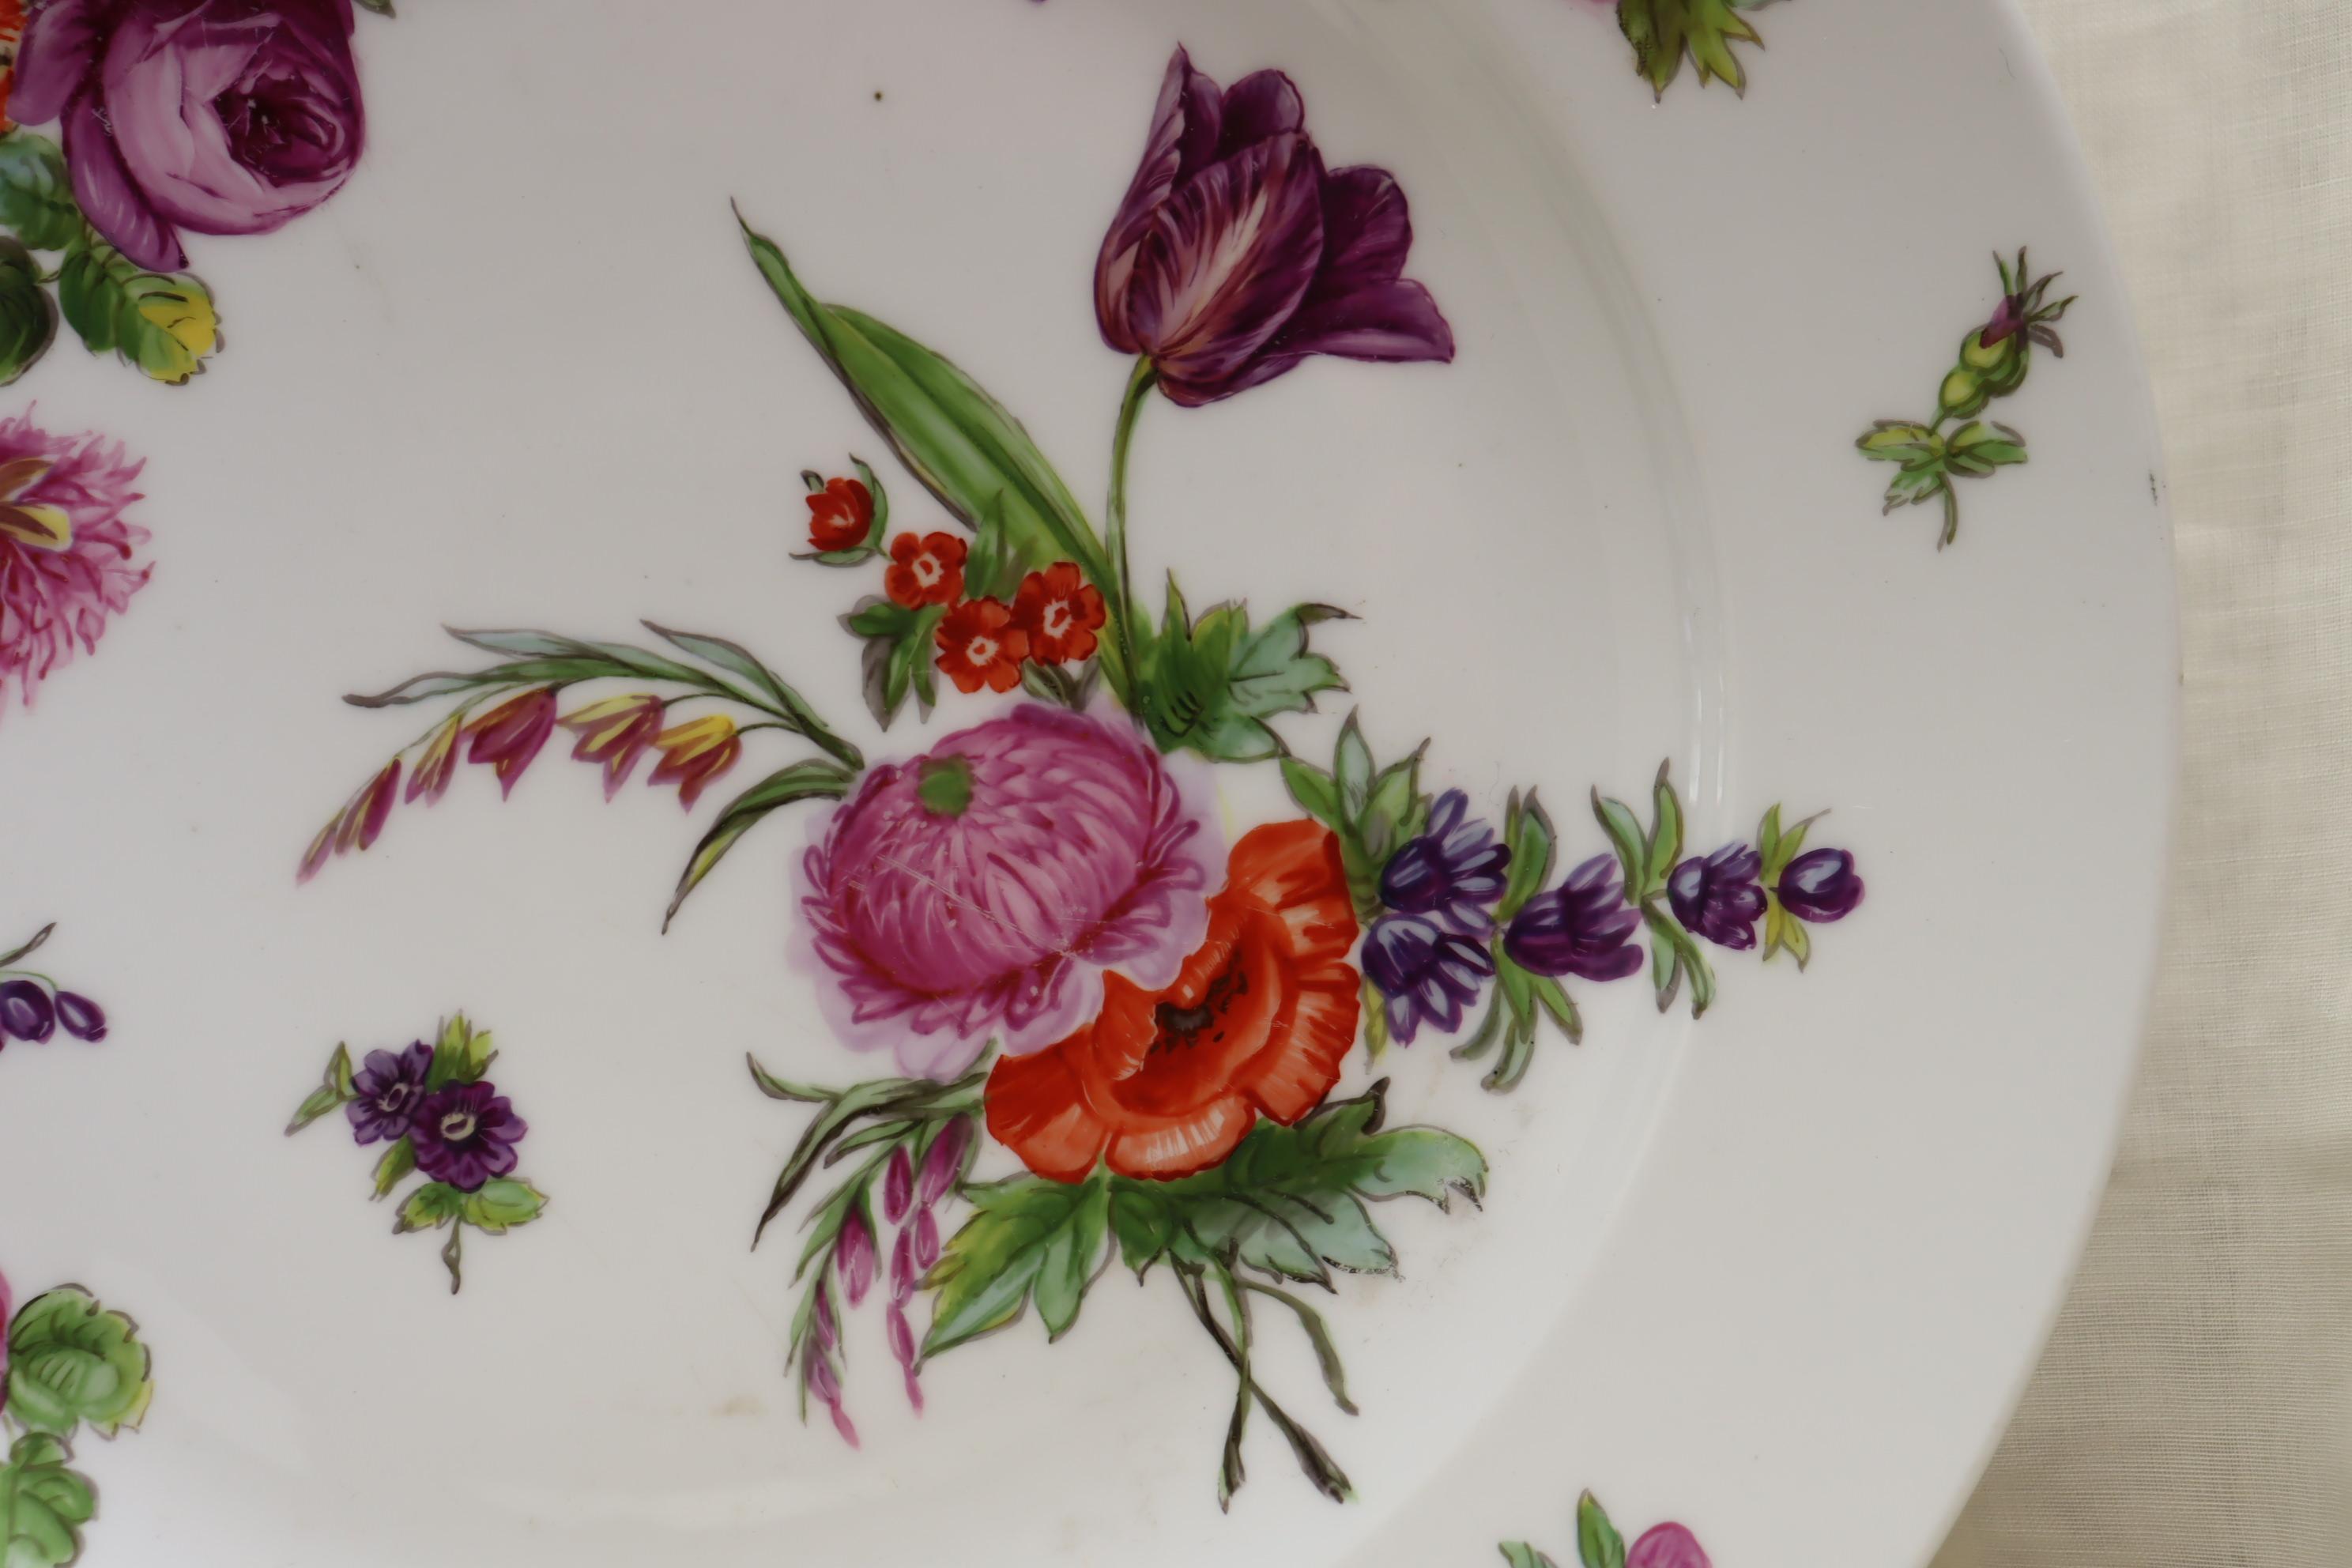 This large, very decorative French porcelain platter, or charger, is decorated with numerous scattered sprays of hand painted flowers. It could be displayed on a stand, on a wall or in the middle of a table as a decorative piece, or used as a fruit